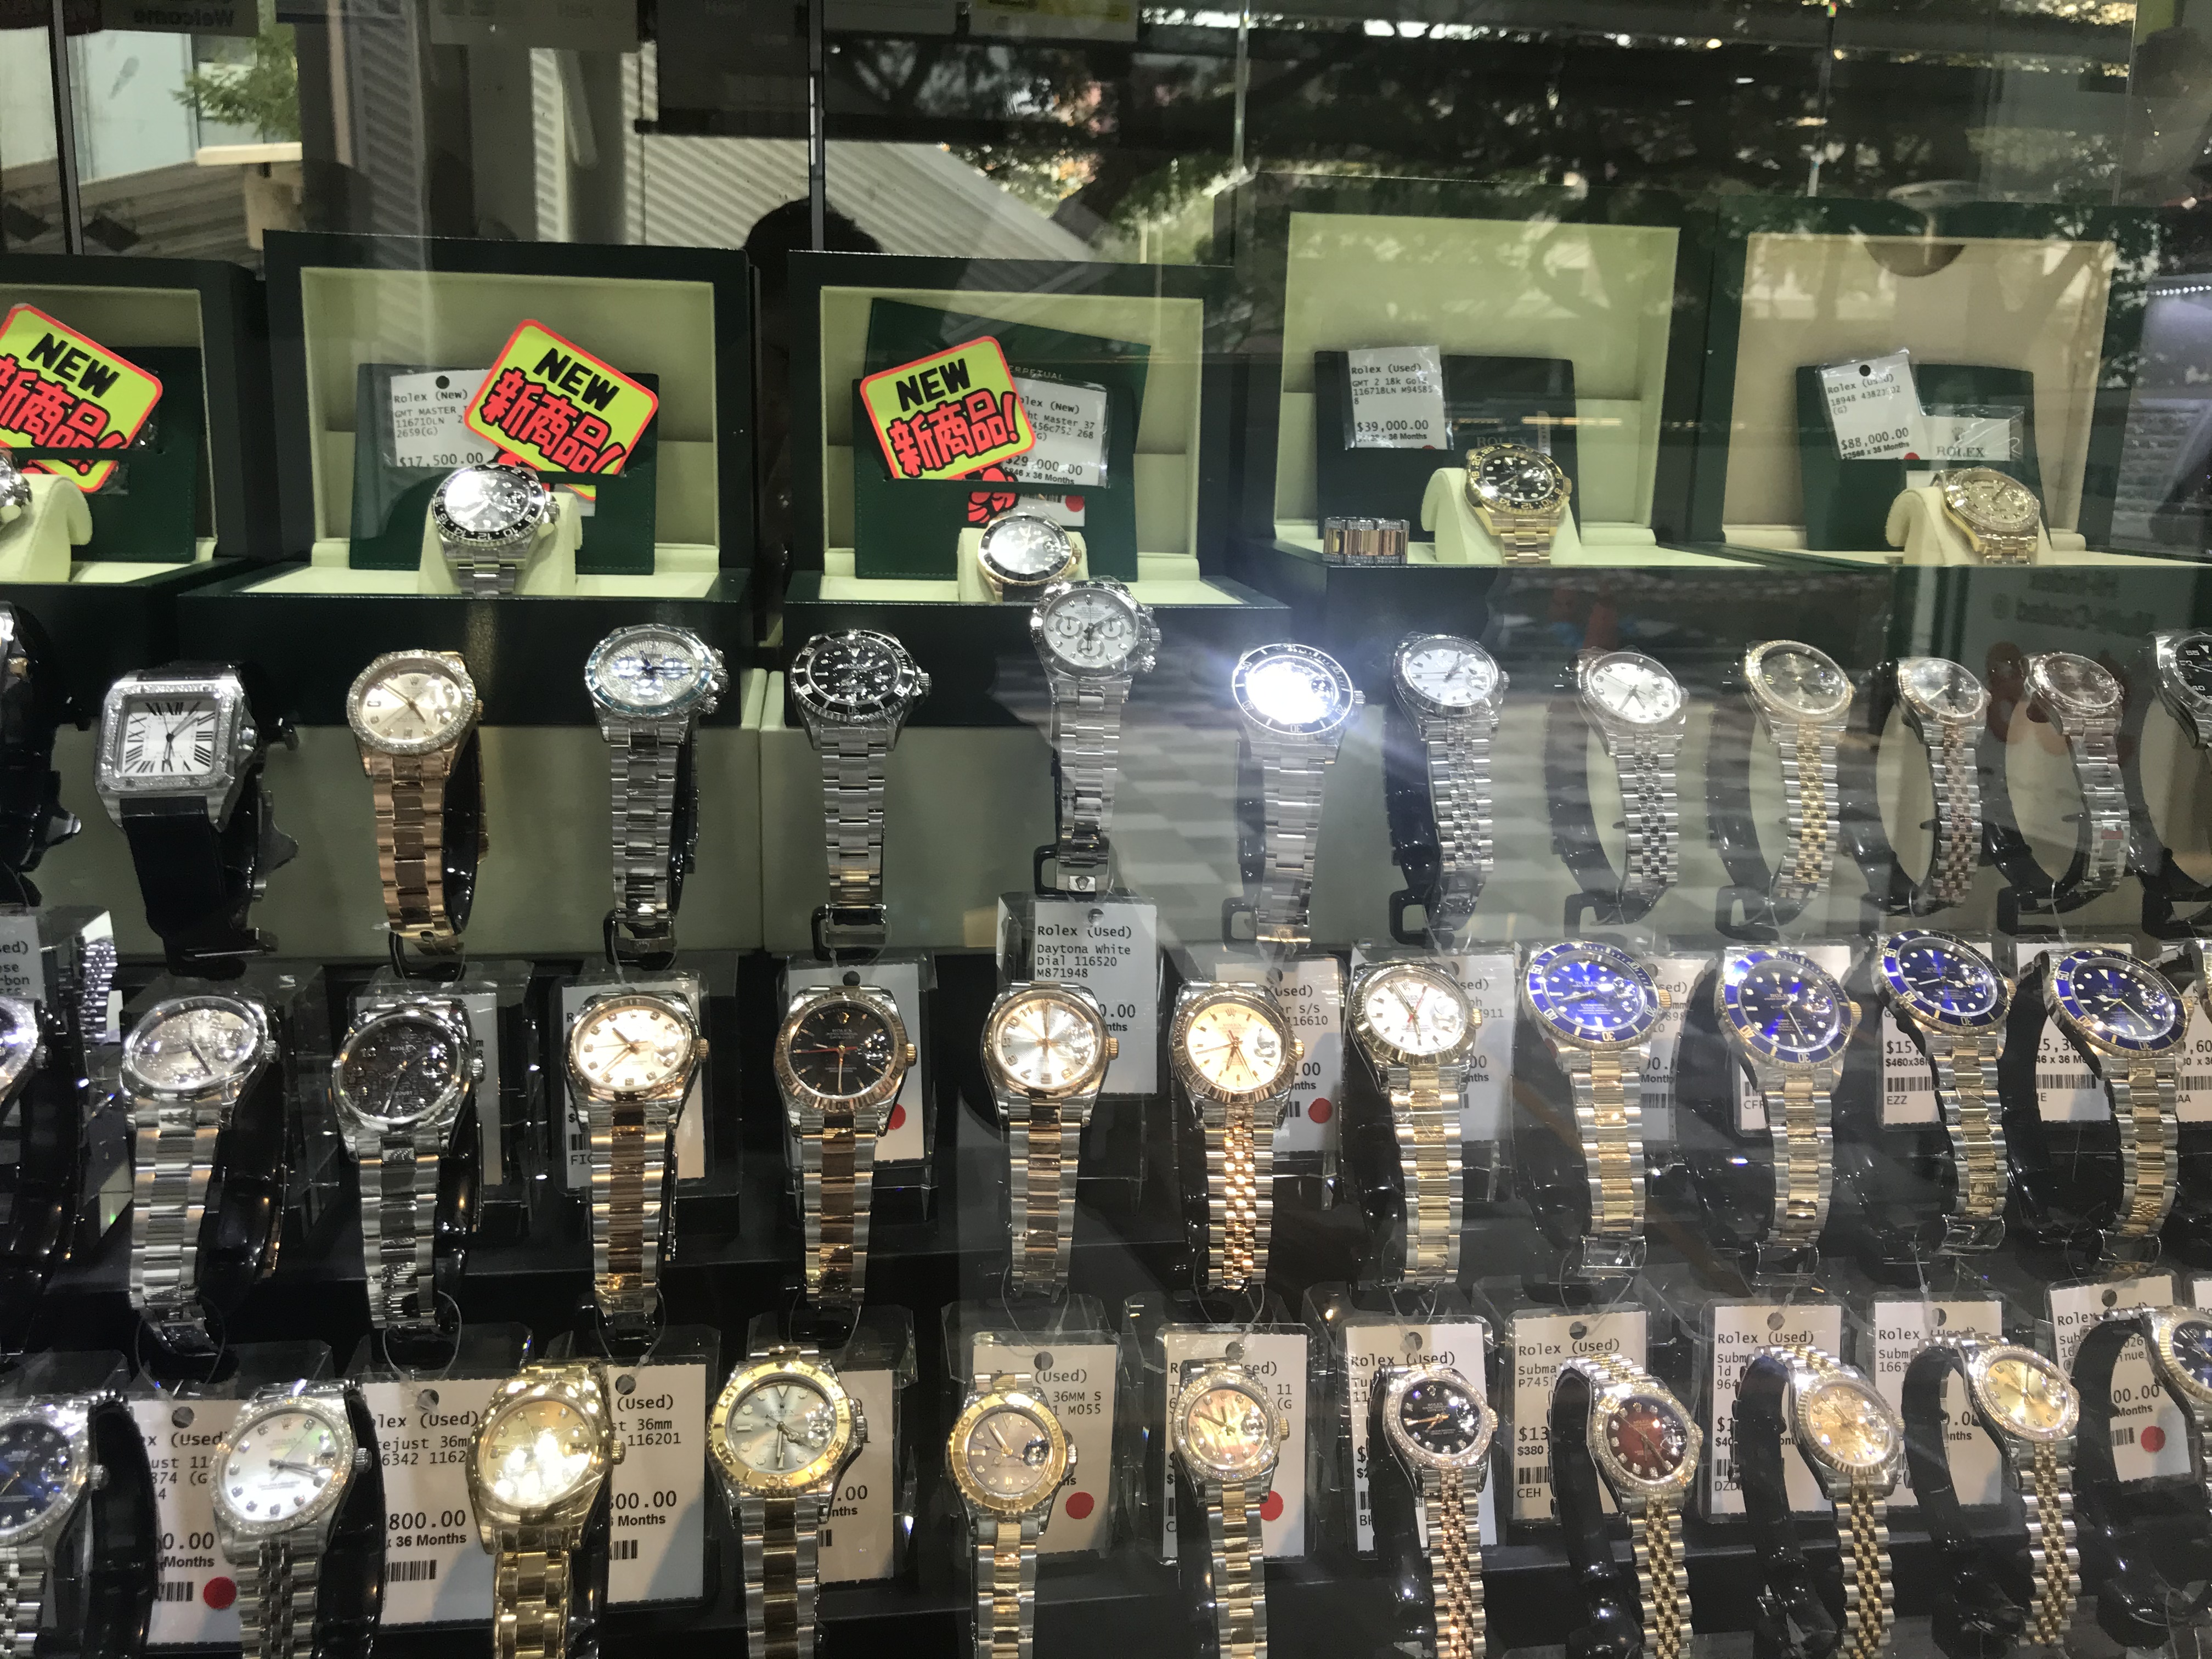 Shop in Bedok sells new and pre-owned Rolex watches from $2.8K - 4